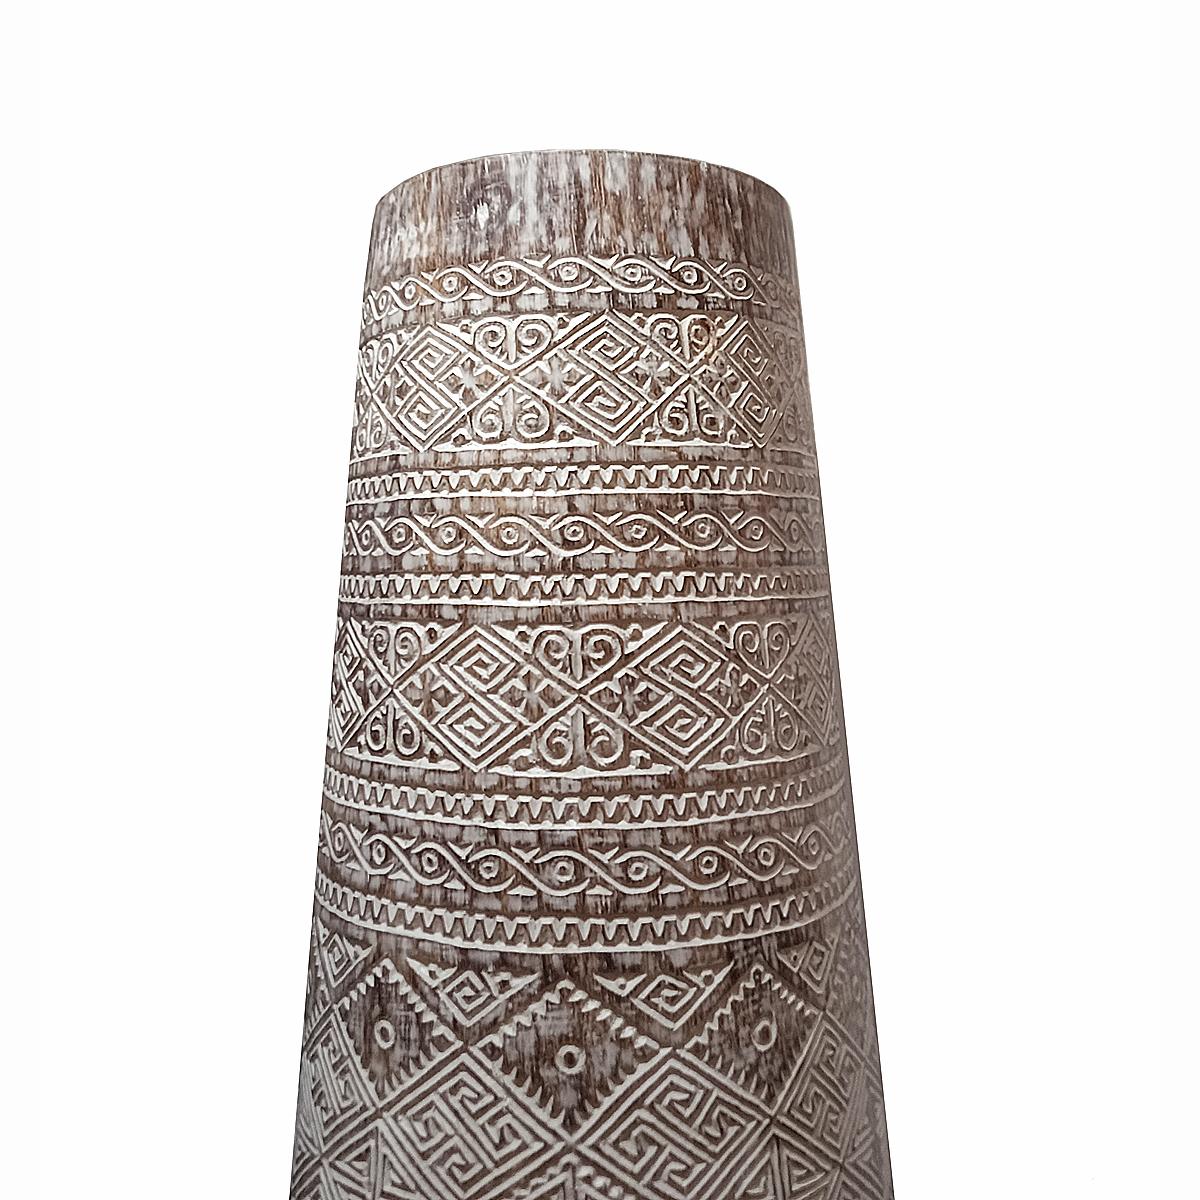 A stunning planter or vase made out of palm tree trunk from Sumatra, Indonesia. At almost 7 feet tall and almost 30 inches in diameter, intricately hand carved, it stands as a stunning sample of contemporary Indonesian craftsmanship. Its whitewash